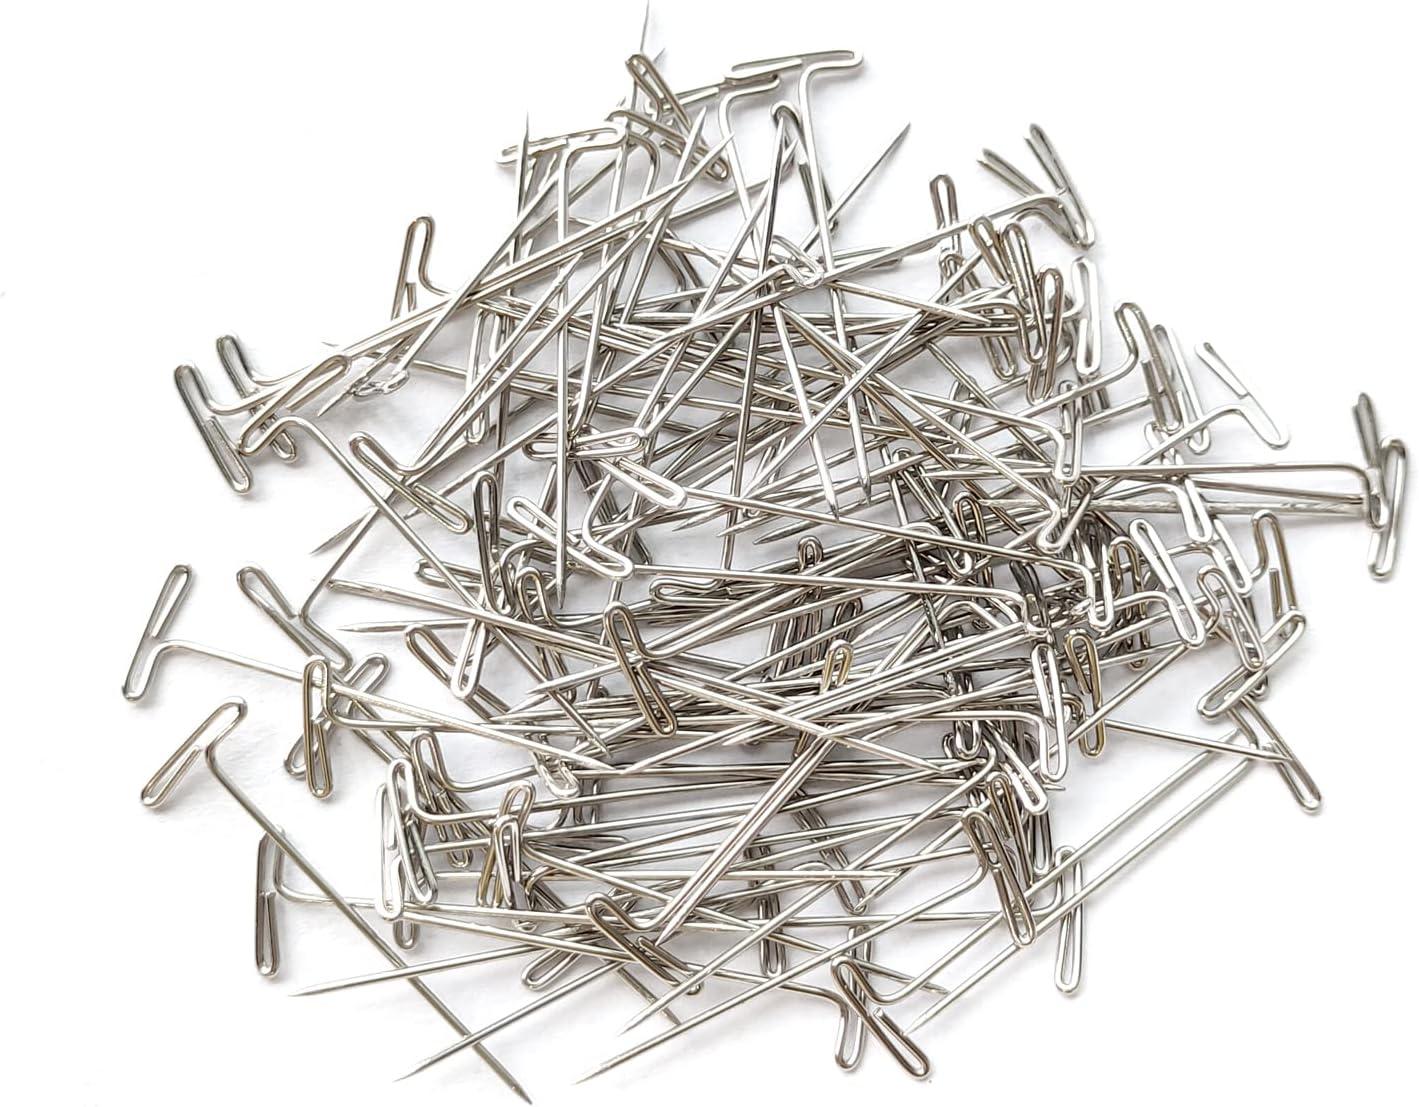 100pcs T-PINS 2 (51mm) FOR MODELLING, POSTING MEMOS, SEWING & CRAFTS Wig  pin